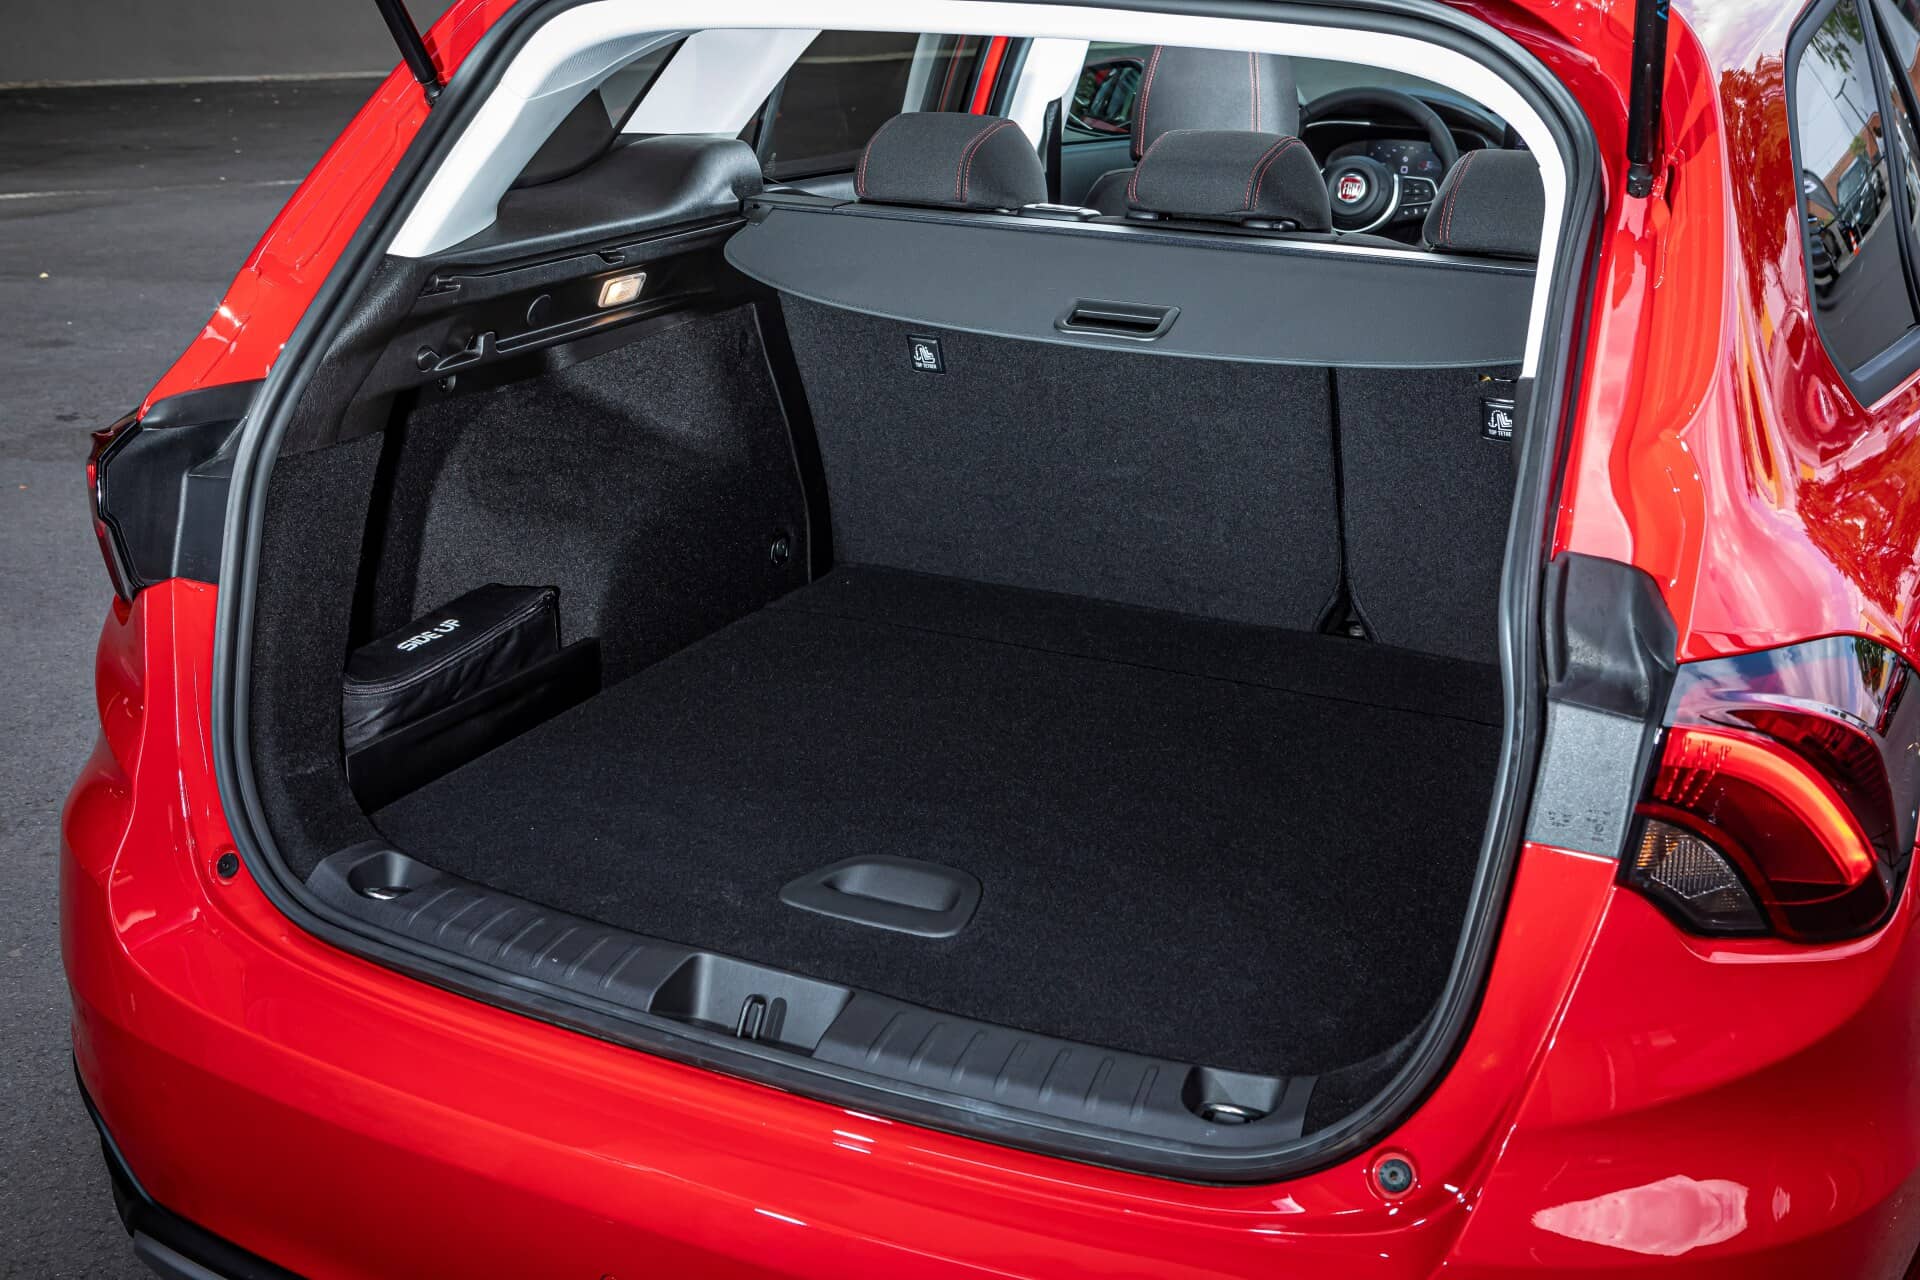 The family car to erase you from the SUVs has a 550-liter trunk, costs €20,000 and has immediate delivery